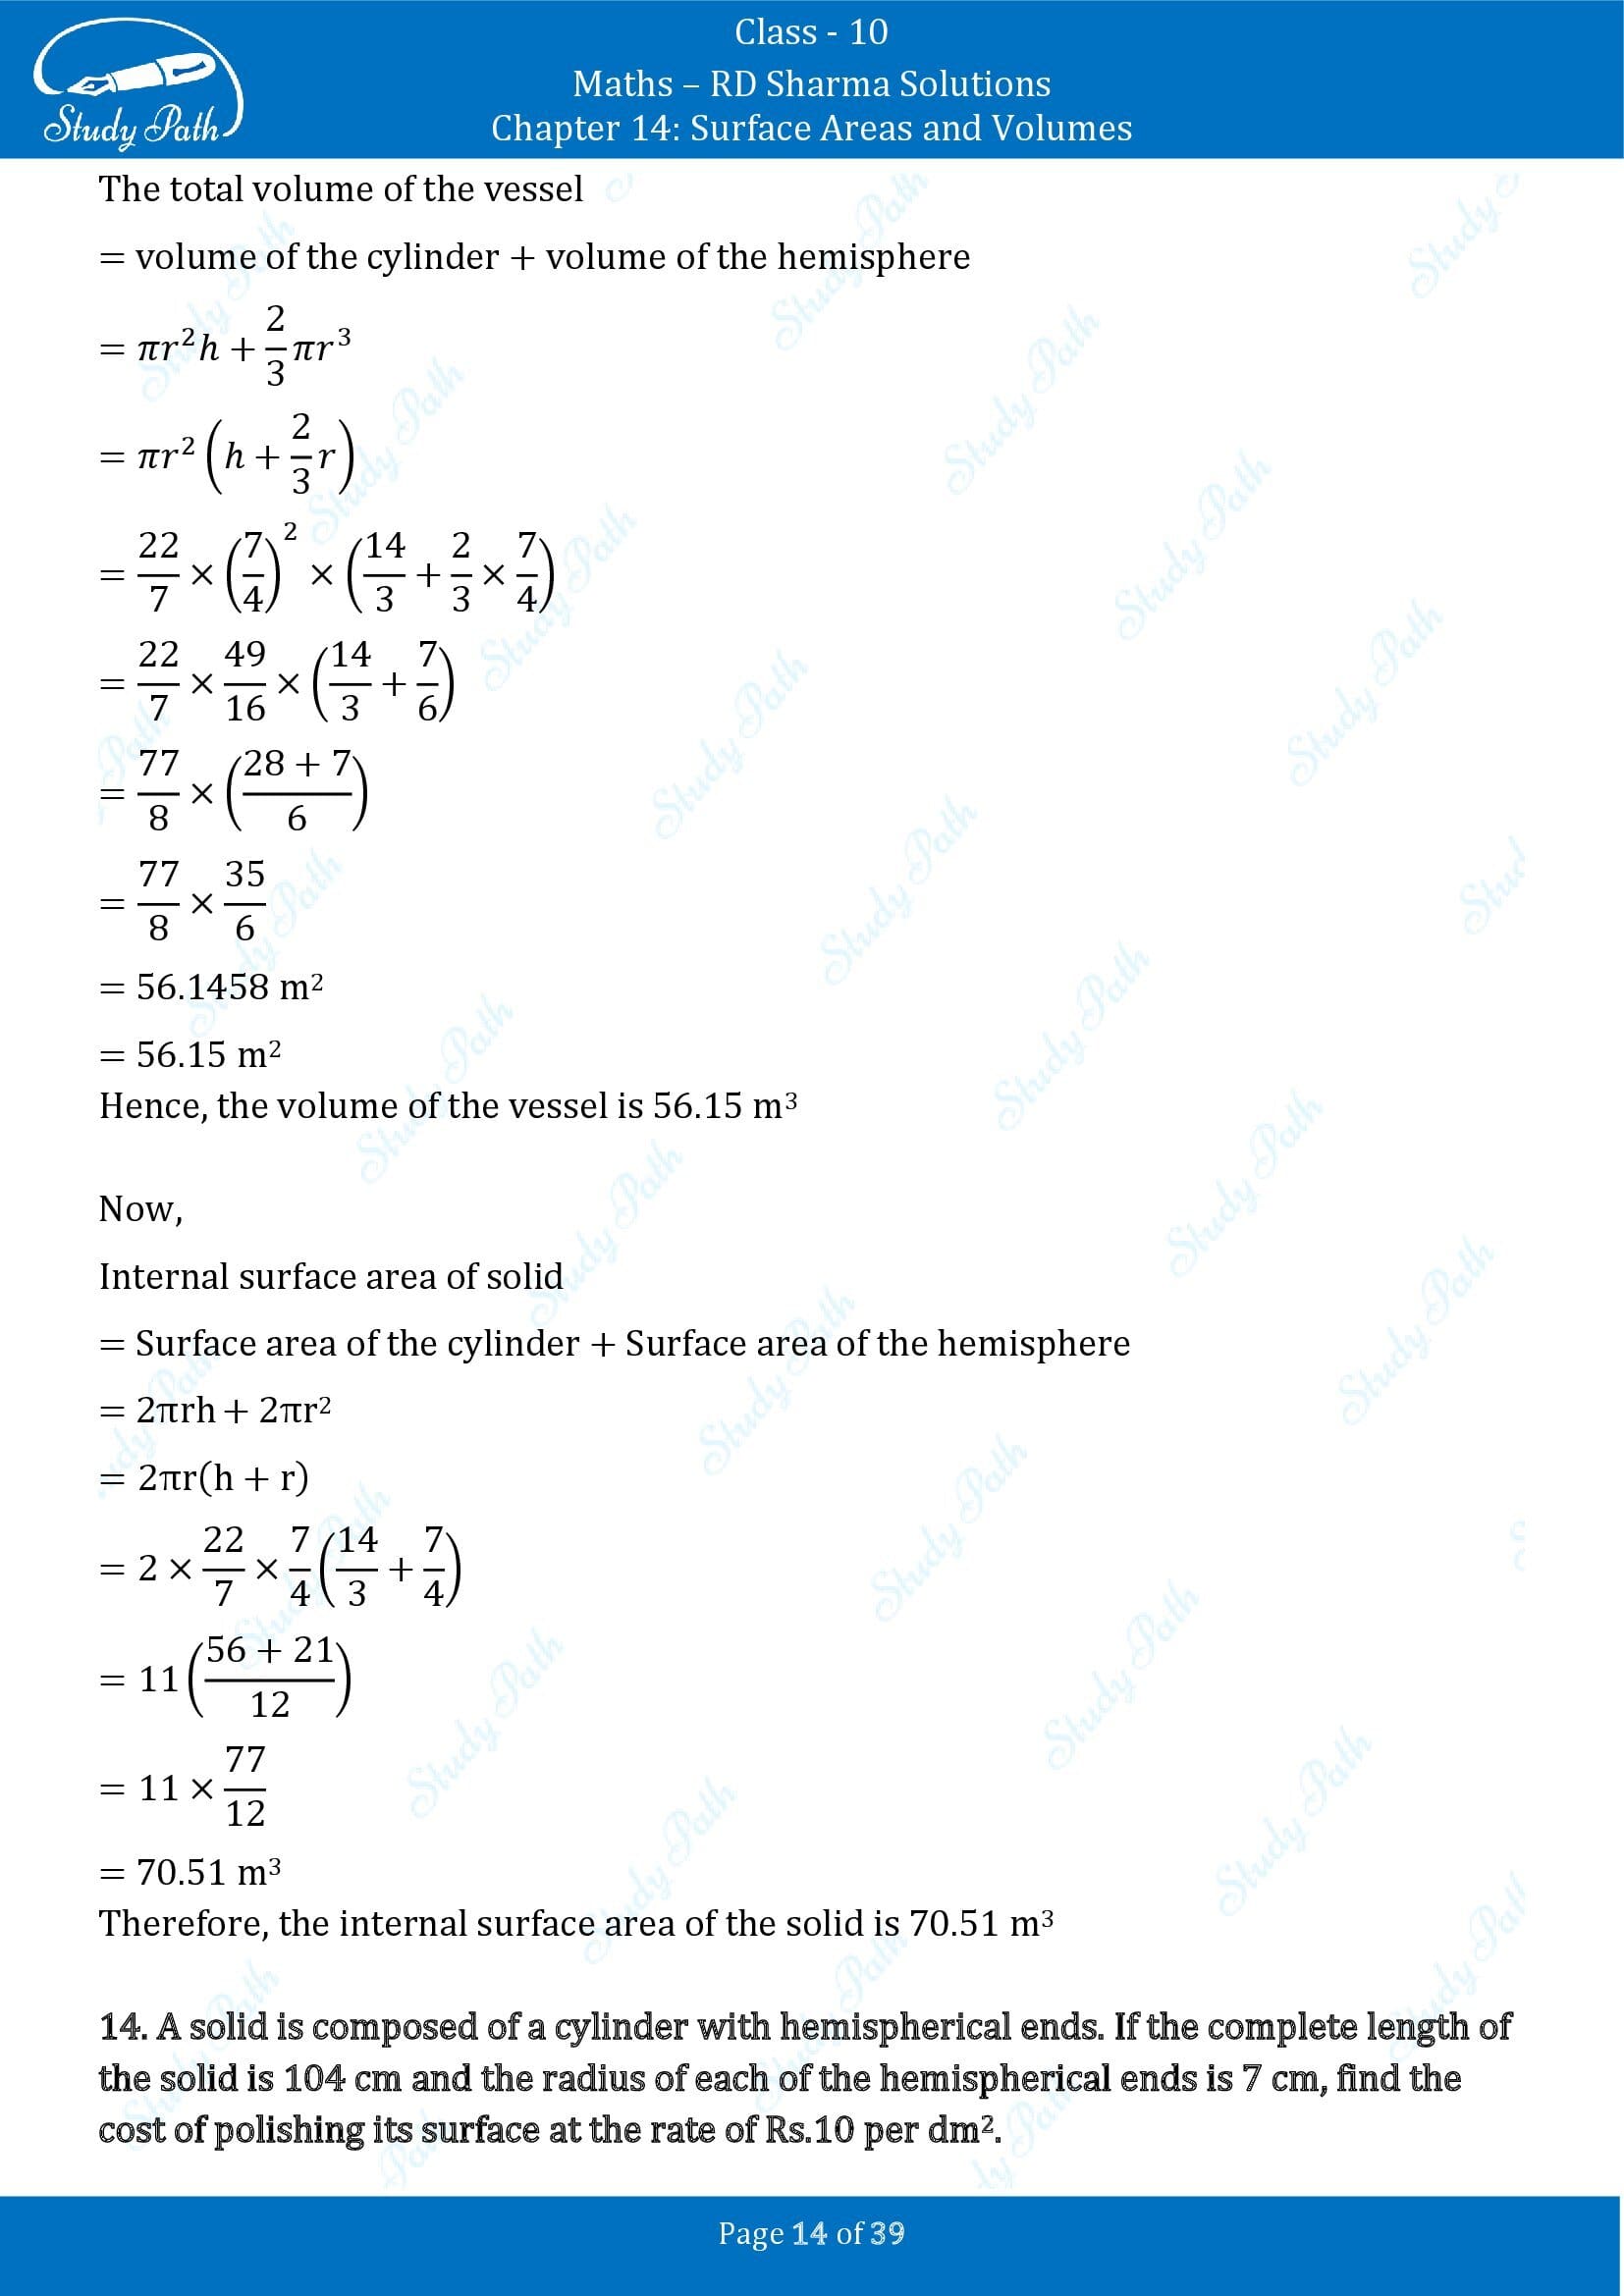 RD Sharma Solutions Class 10 Chapter 14 Surface Areas and Volumes Exercise 14.2 00014